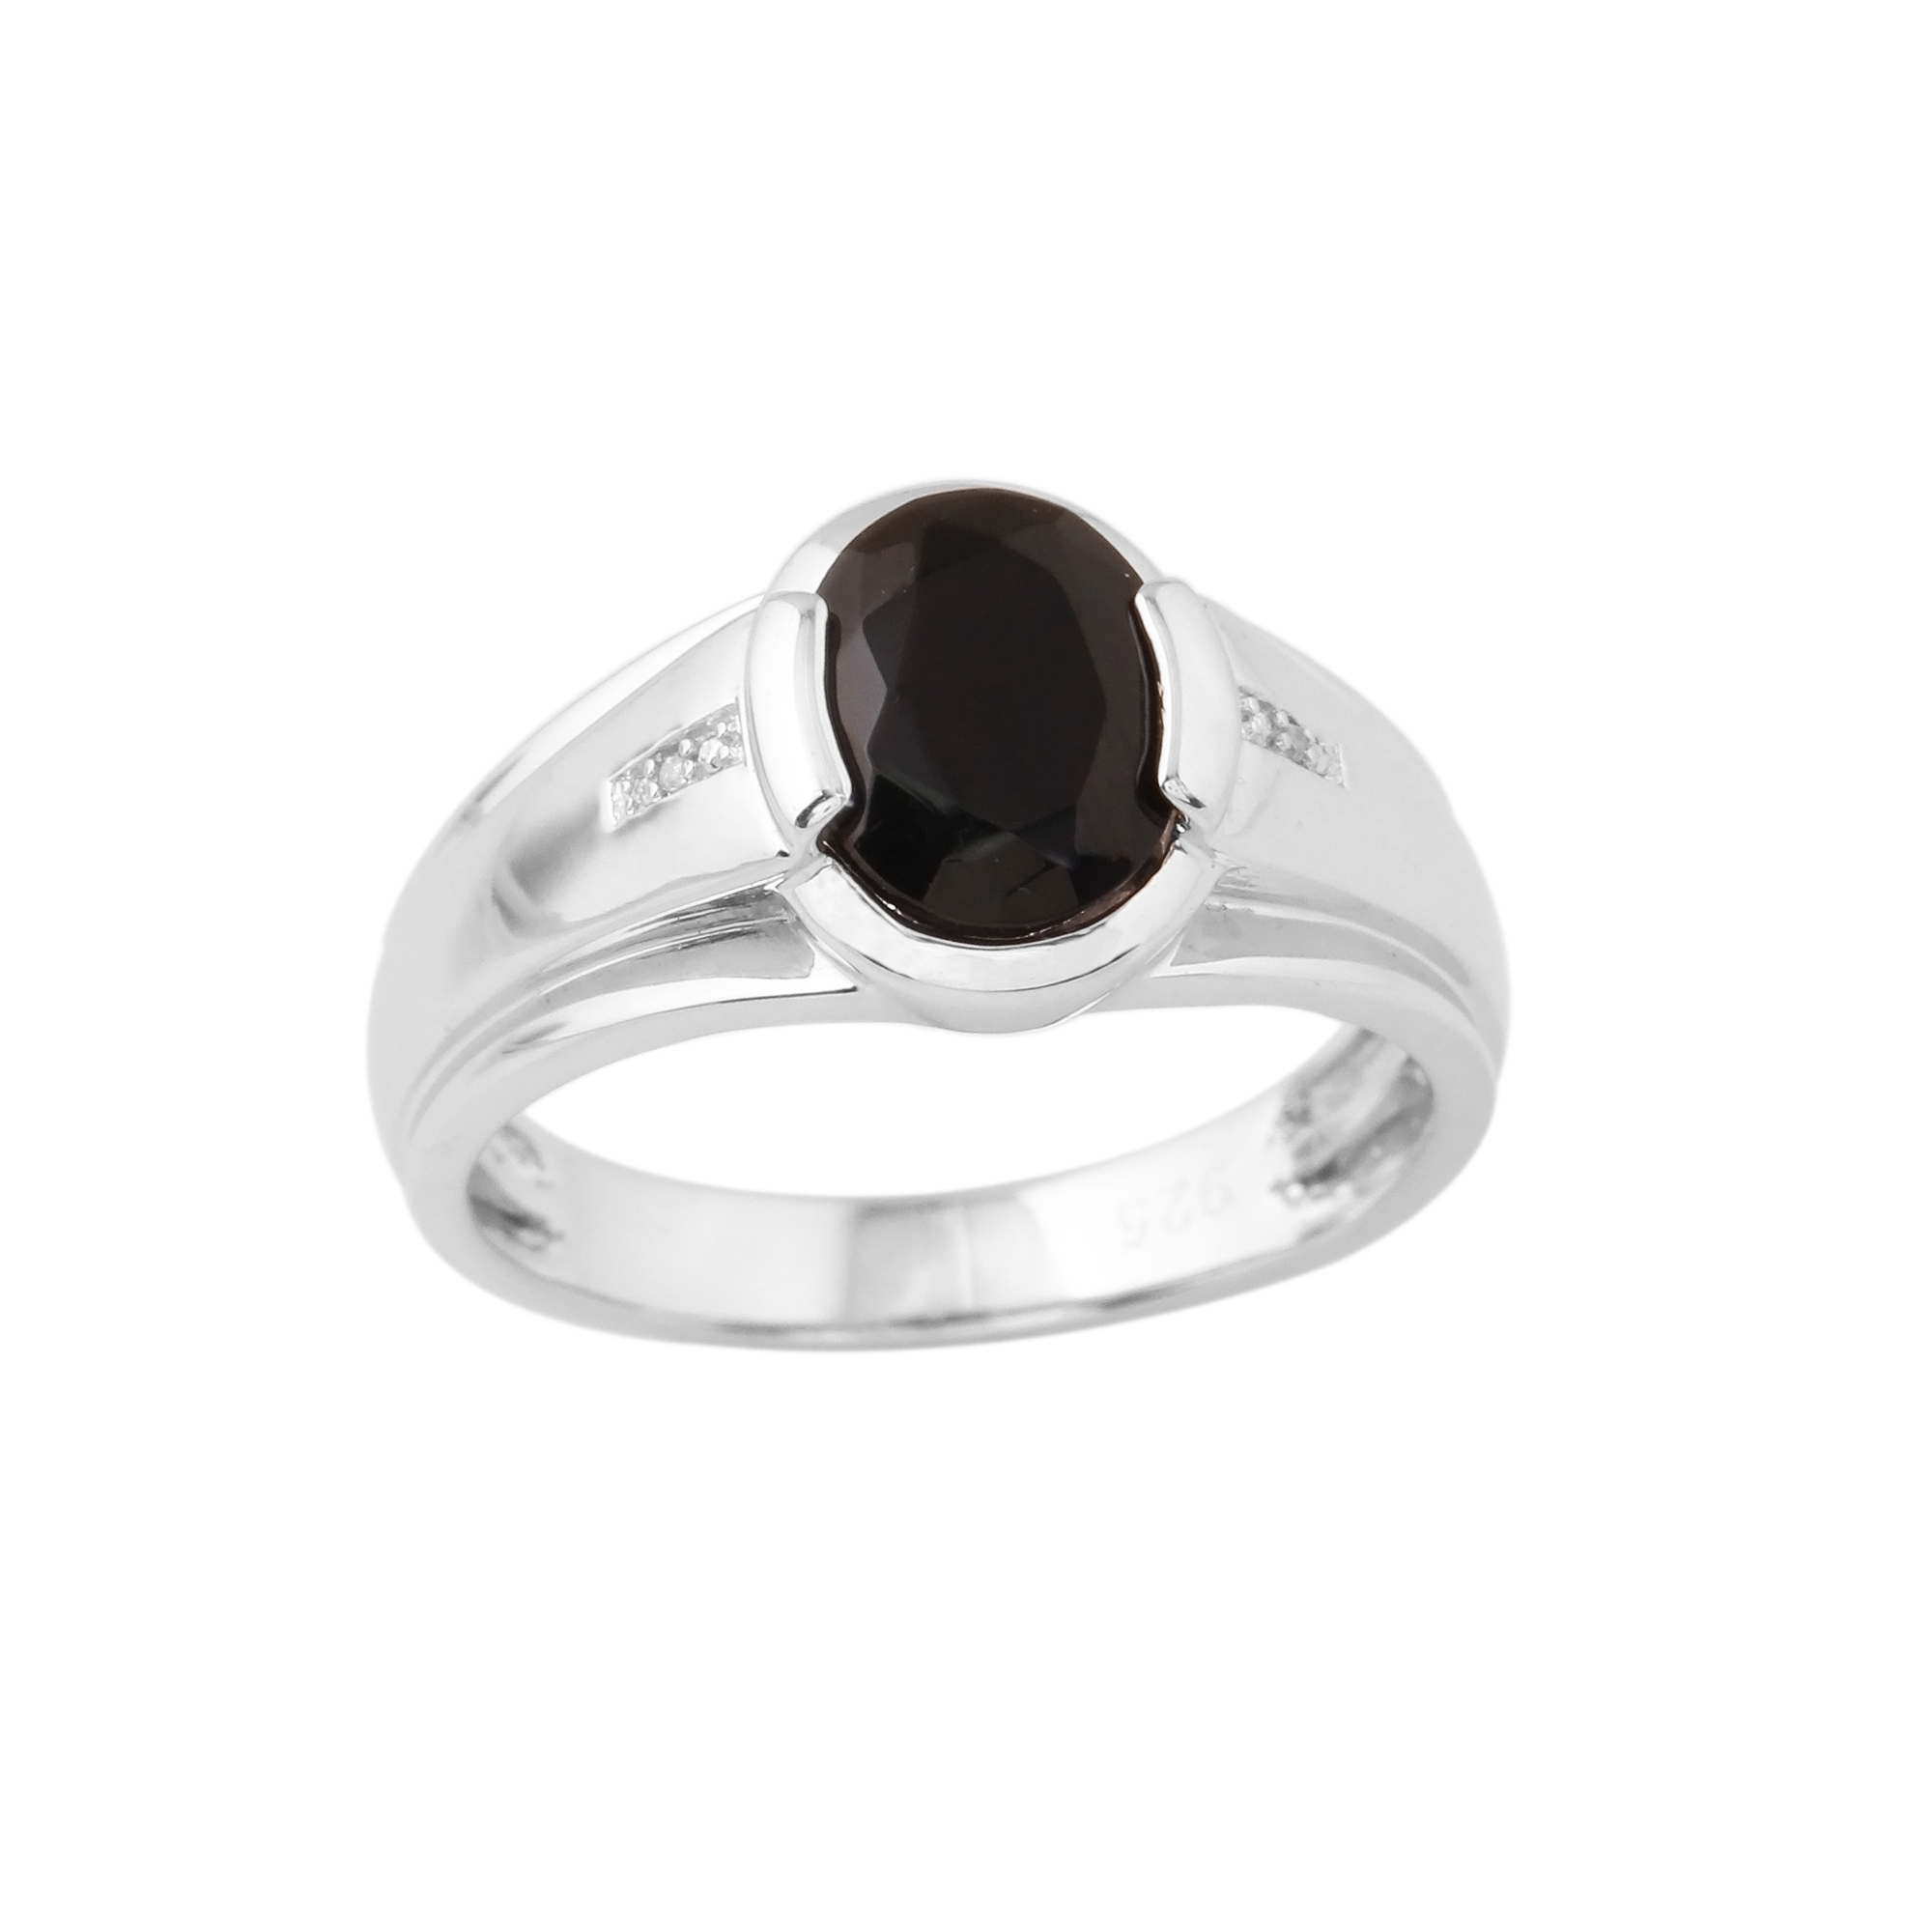 Men's Onyx Sterling Silver and Diamond Accent Ring - Size 10 Only